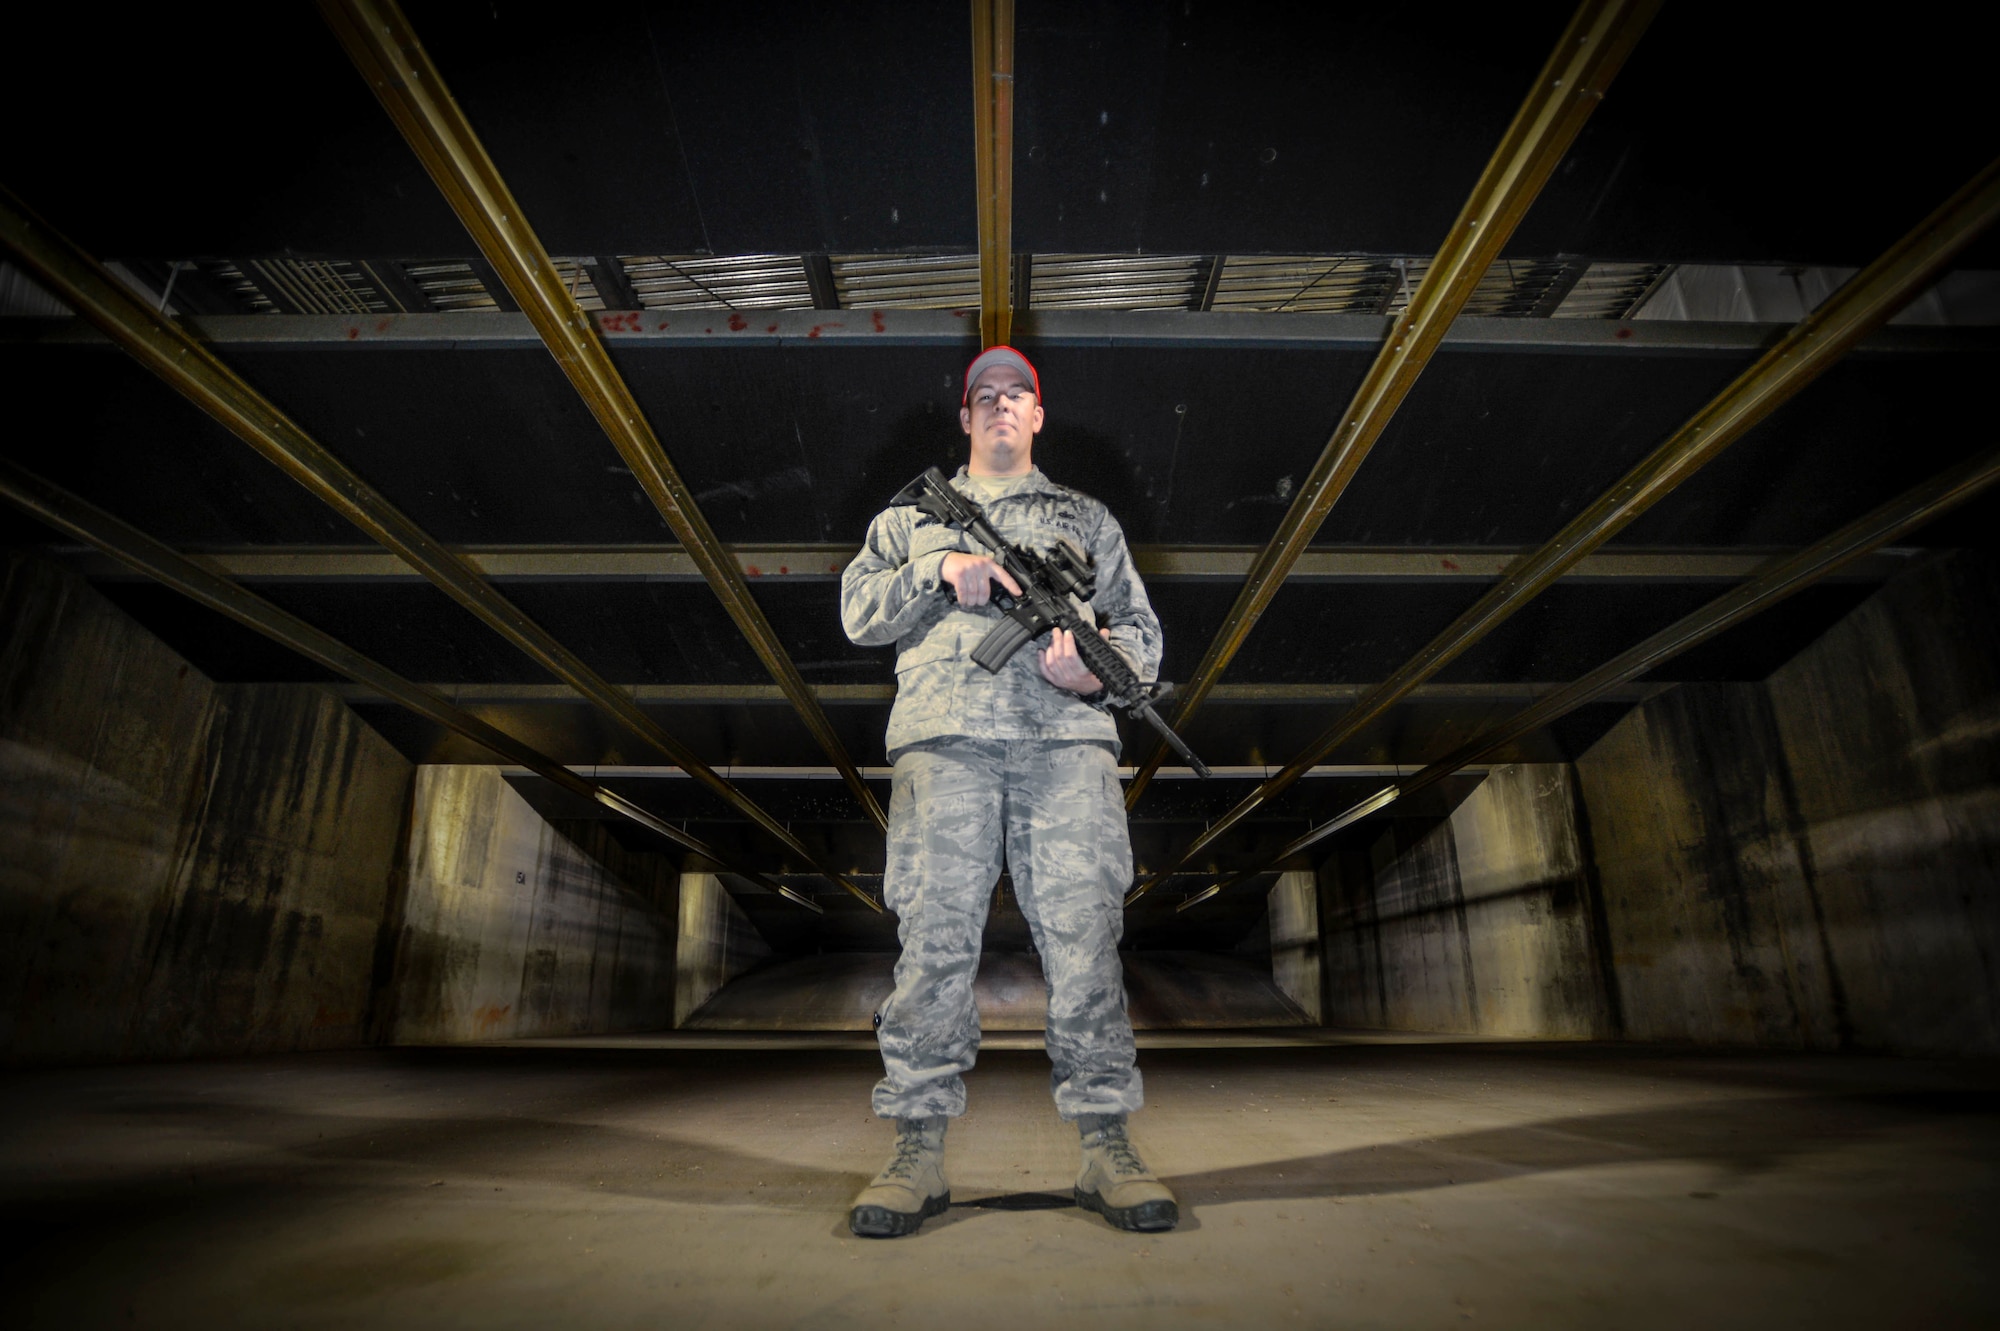 U.S. Air Force Staff Sgt. Jason Mufford, 20th Security Forces Squadron combat arms instructor, holds an M4 carbine at Shaw Air Force Base, S.C., March 9, 2016. Mufford’s primary duty is to teach Team Shaw members about various weaponry to ensure their safety during future operations. (U.S. Air Force photo by Senior Airman Jensen Stidham)